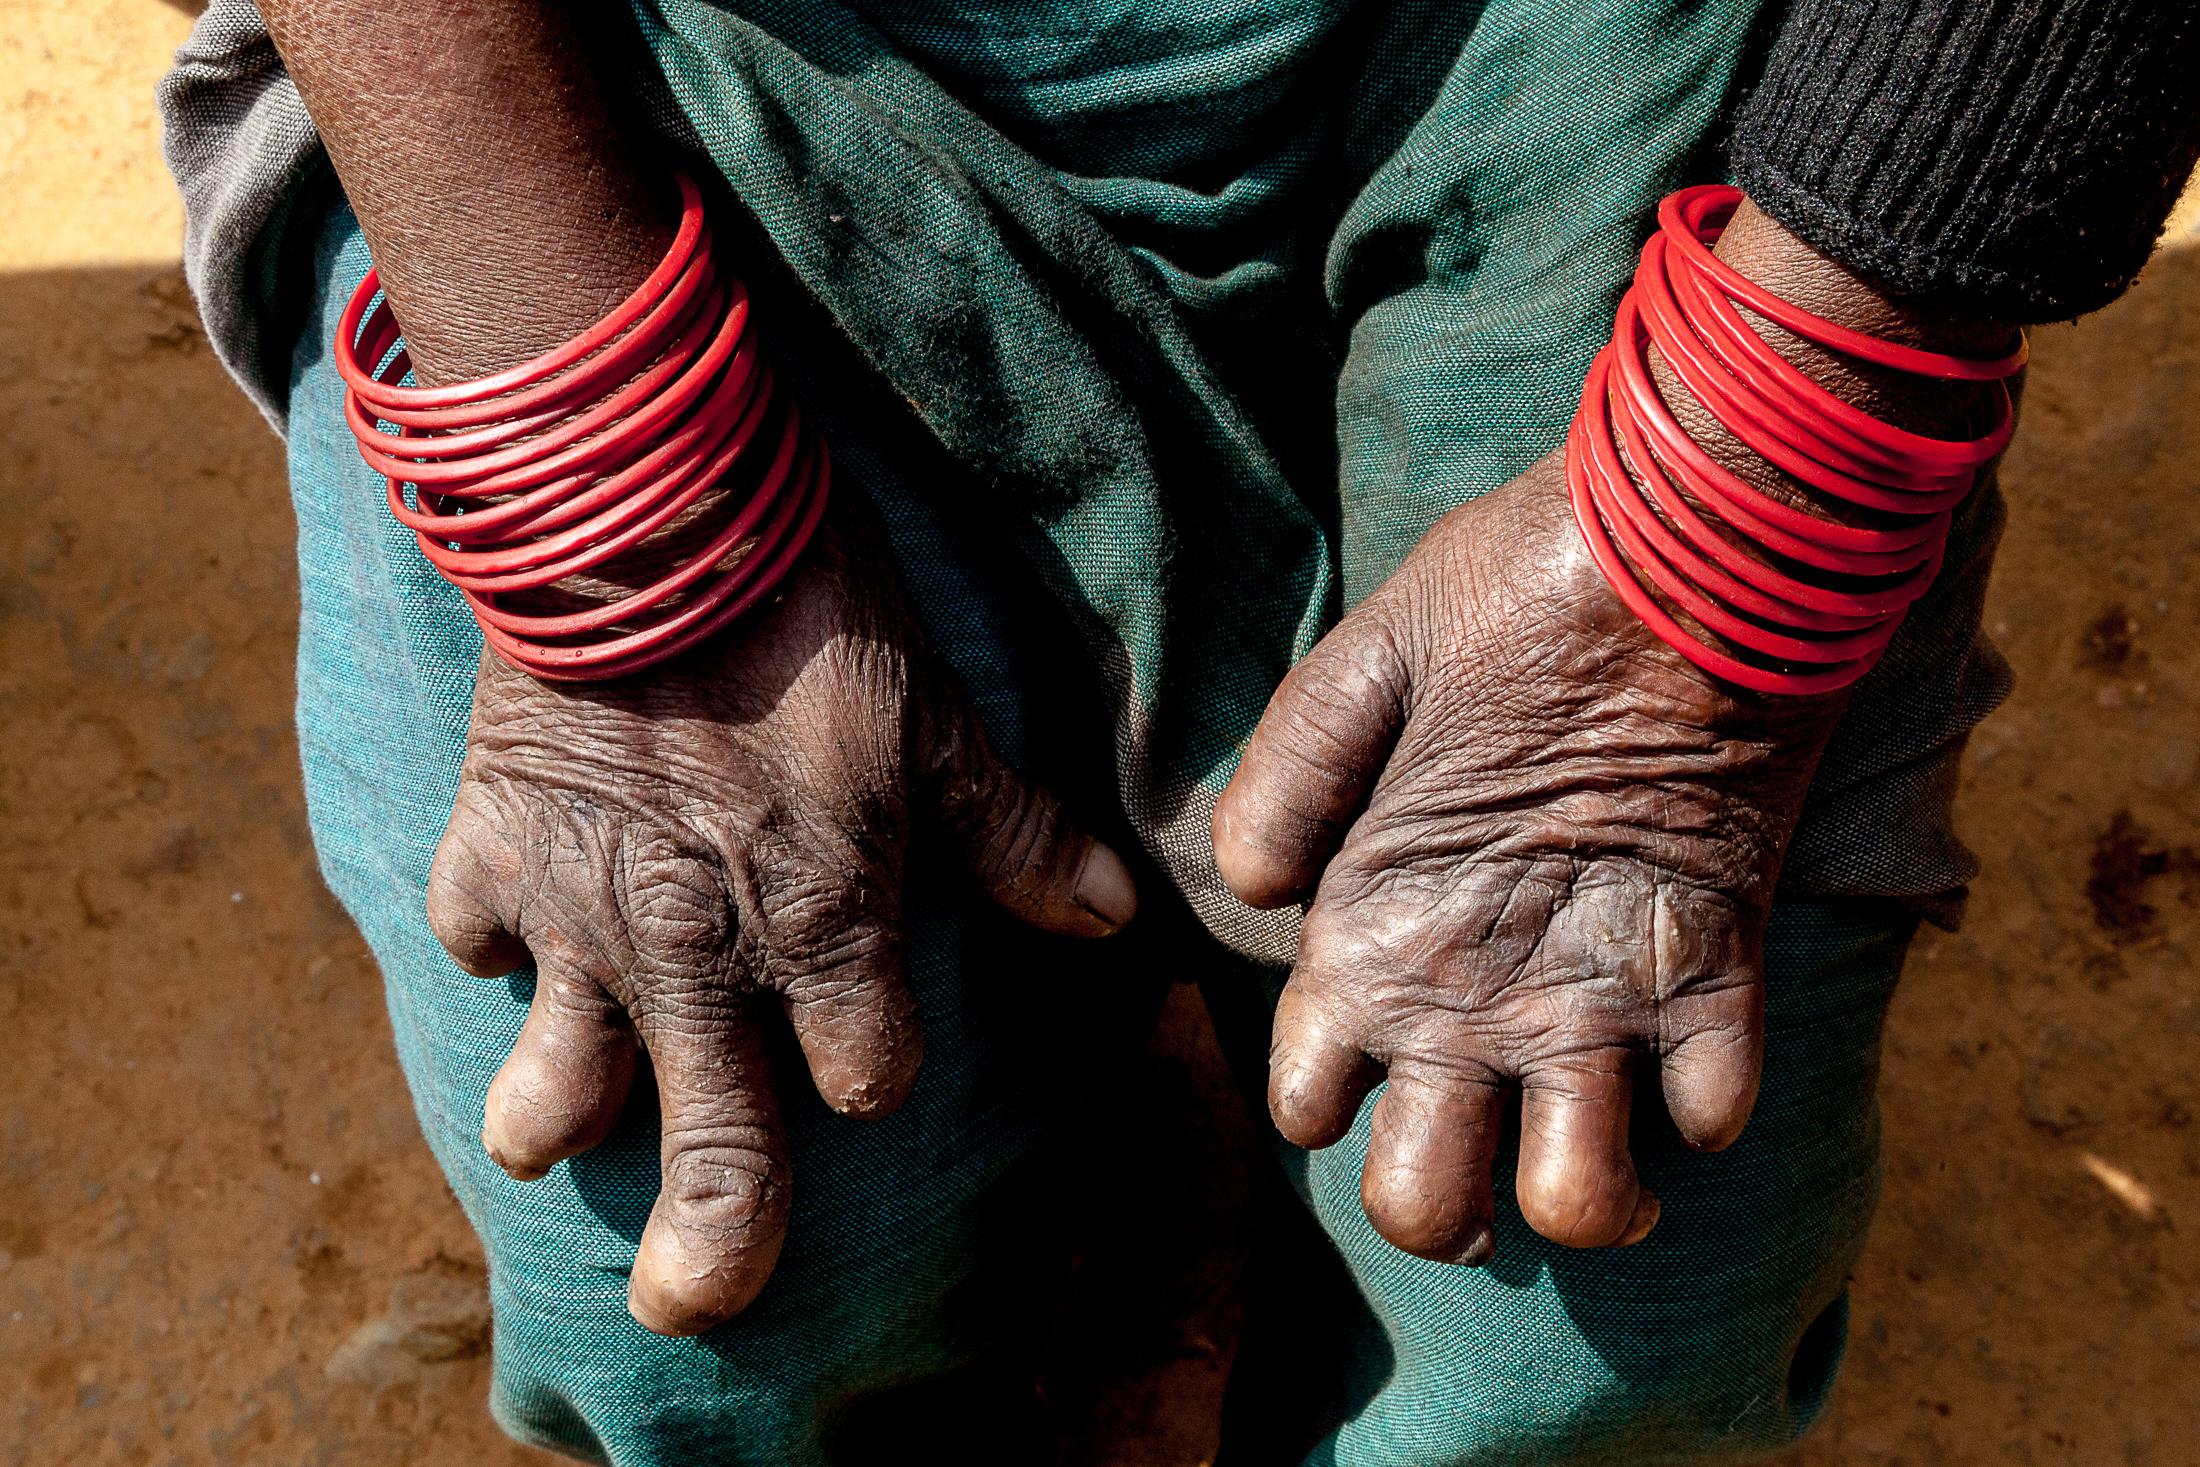 The Forgotten - LELE, NEPAL - JANUARY 24: A woman affected by leprosy...